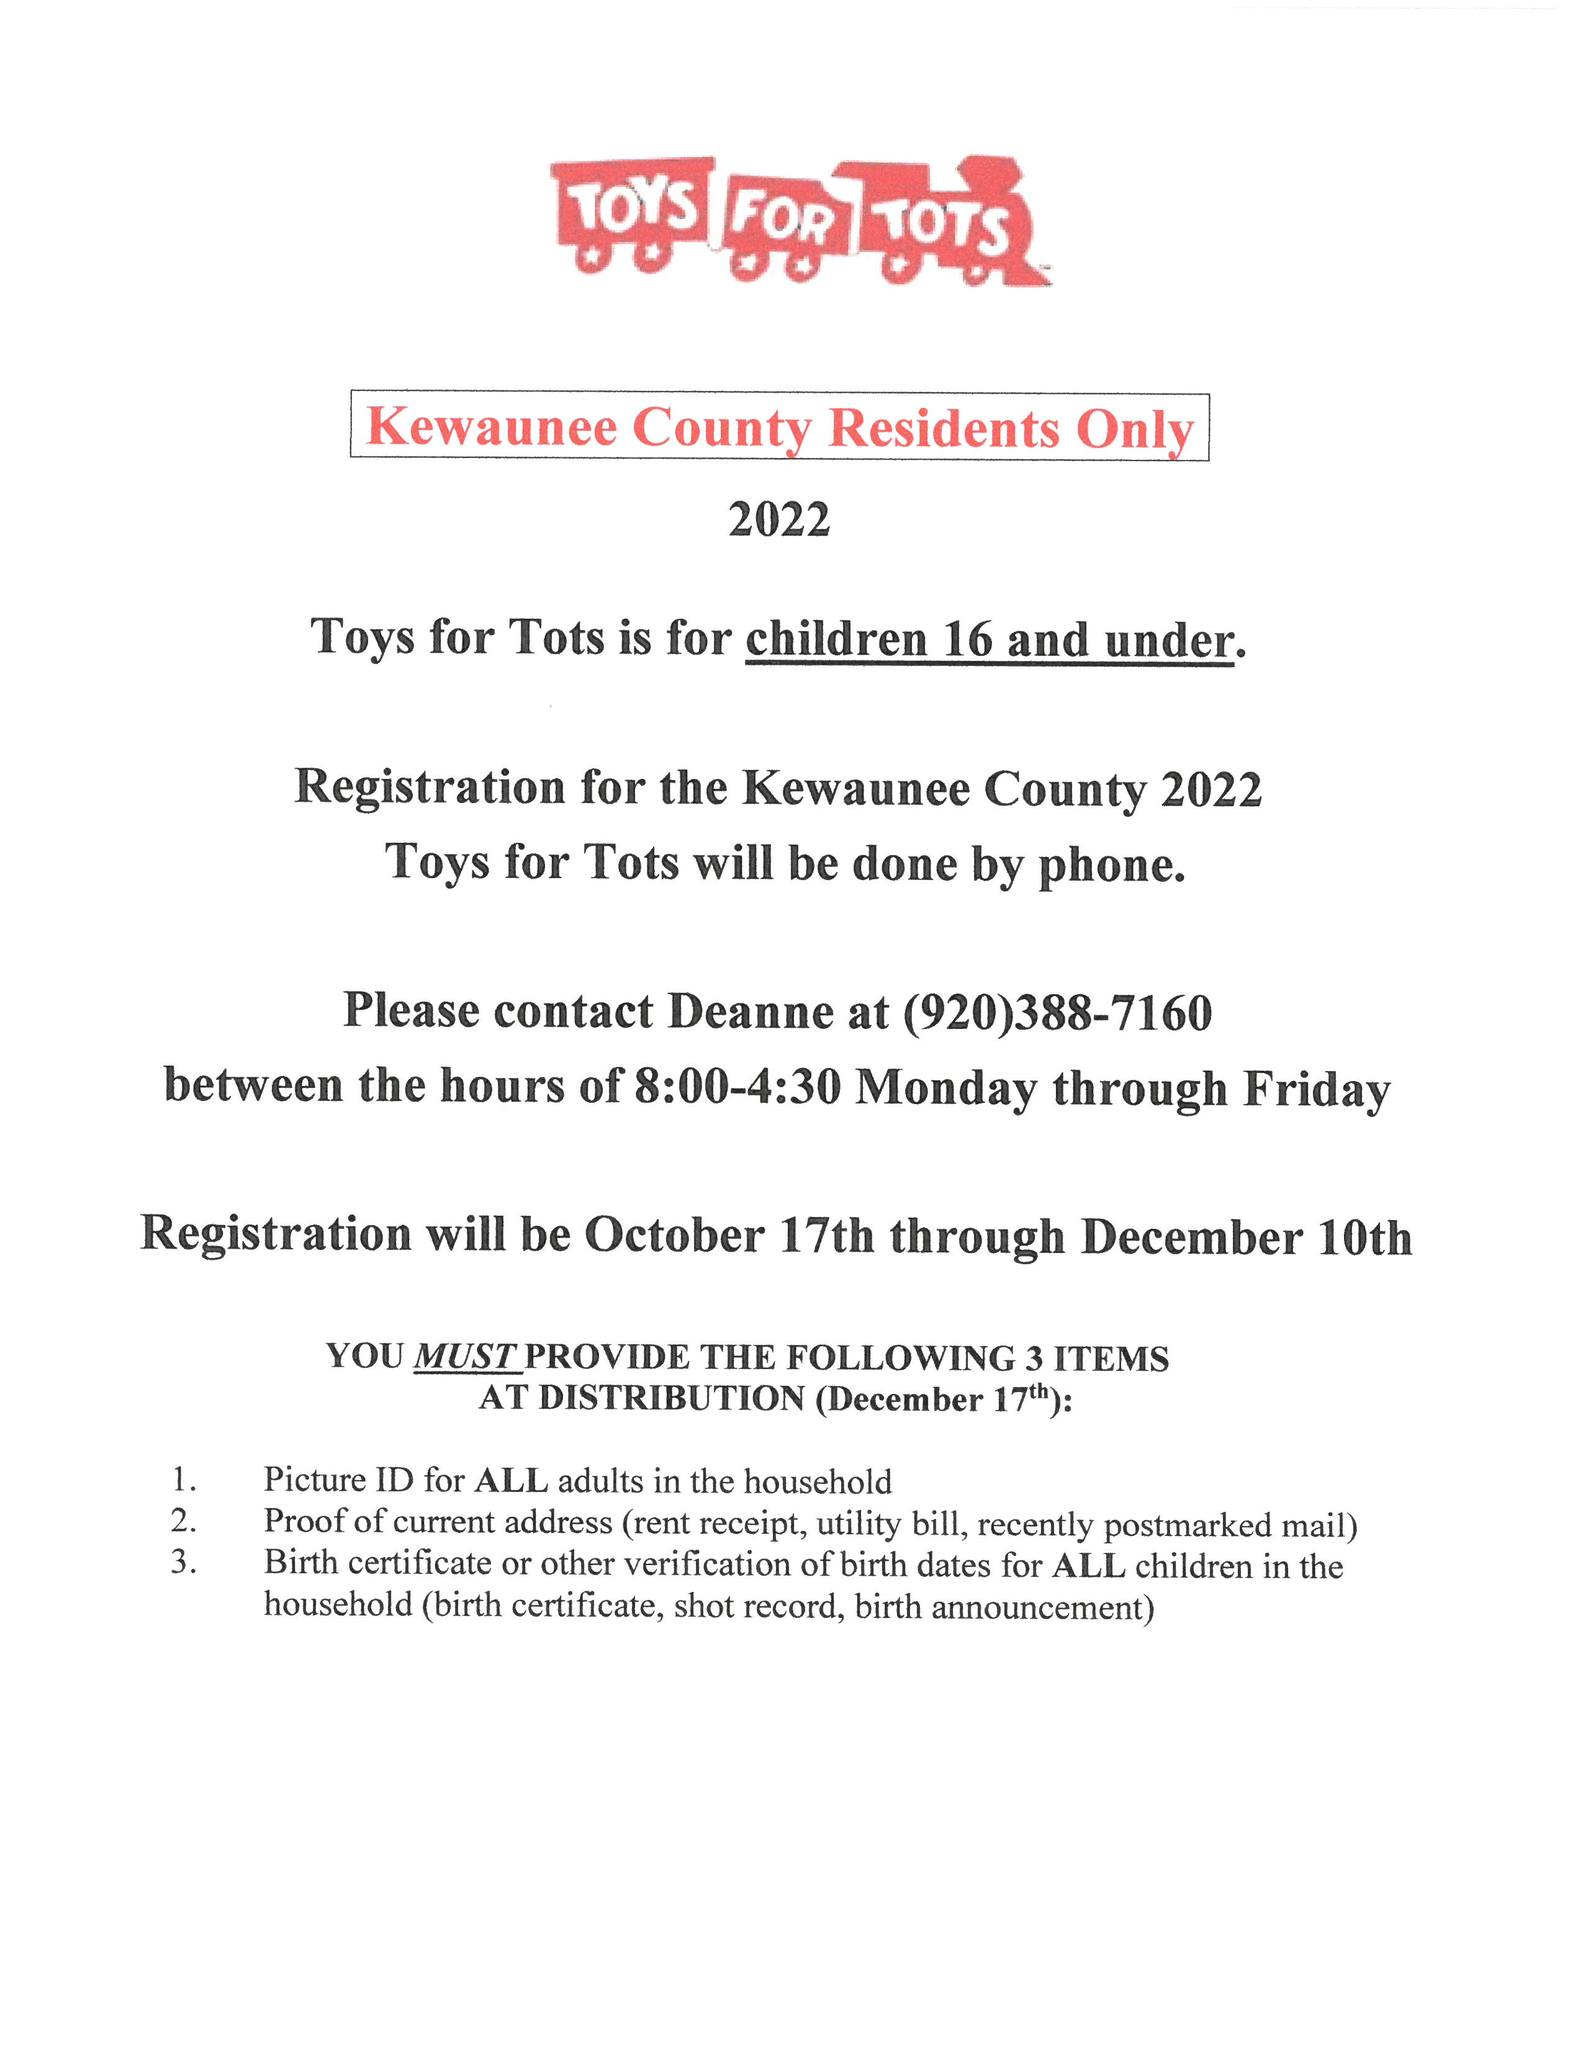 Kewaunee County Toys For Tots Opens